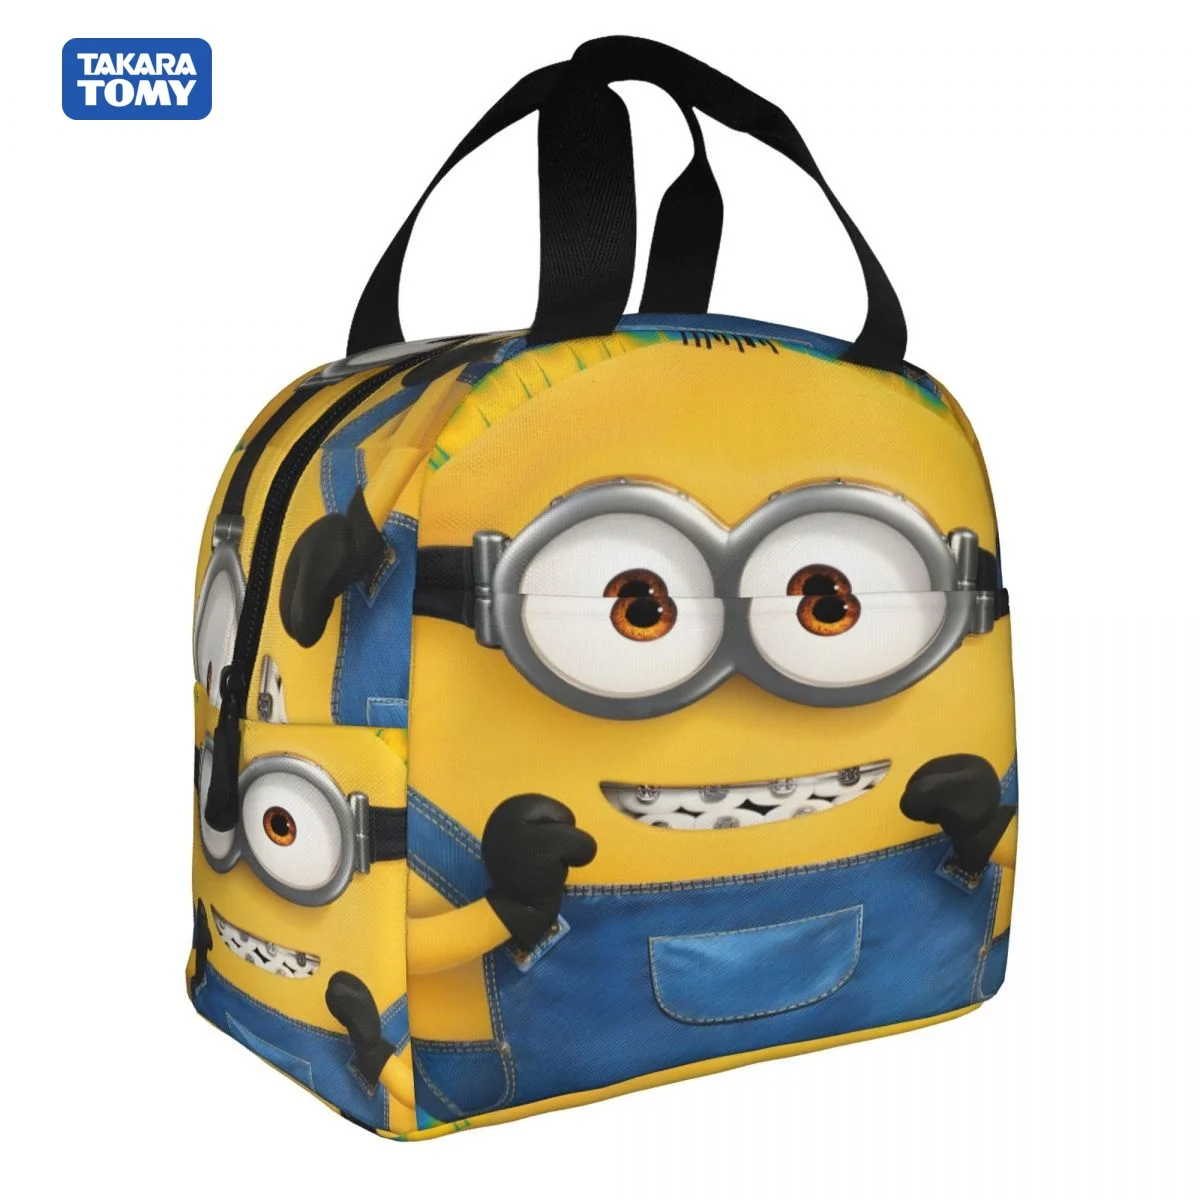 

Despicable Me Minions Insulated Lunch Bag for School Kids Office Sac Lunch Portable Thermal Cooler Lunch Box Handbag Gift